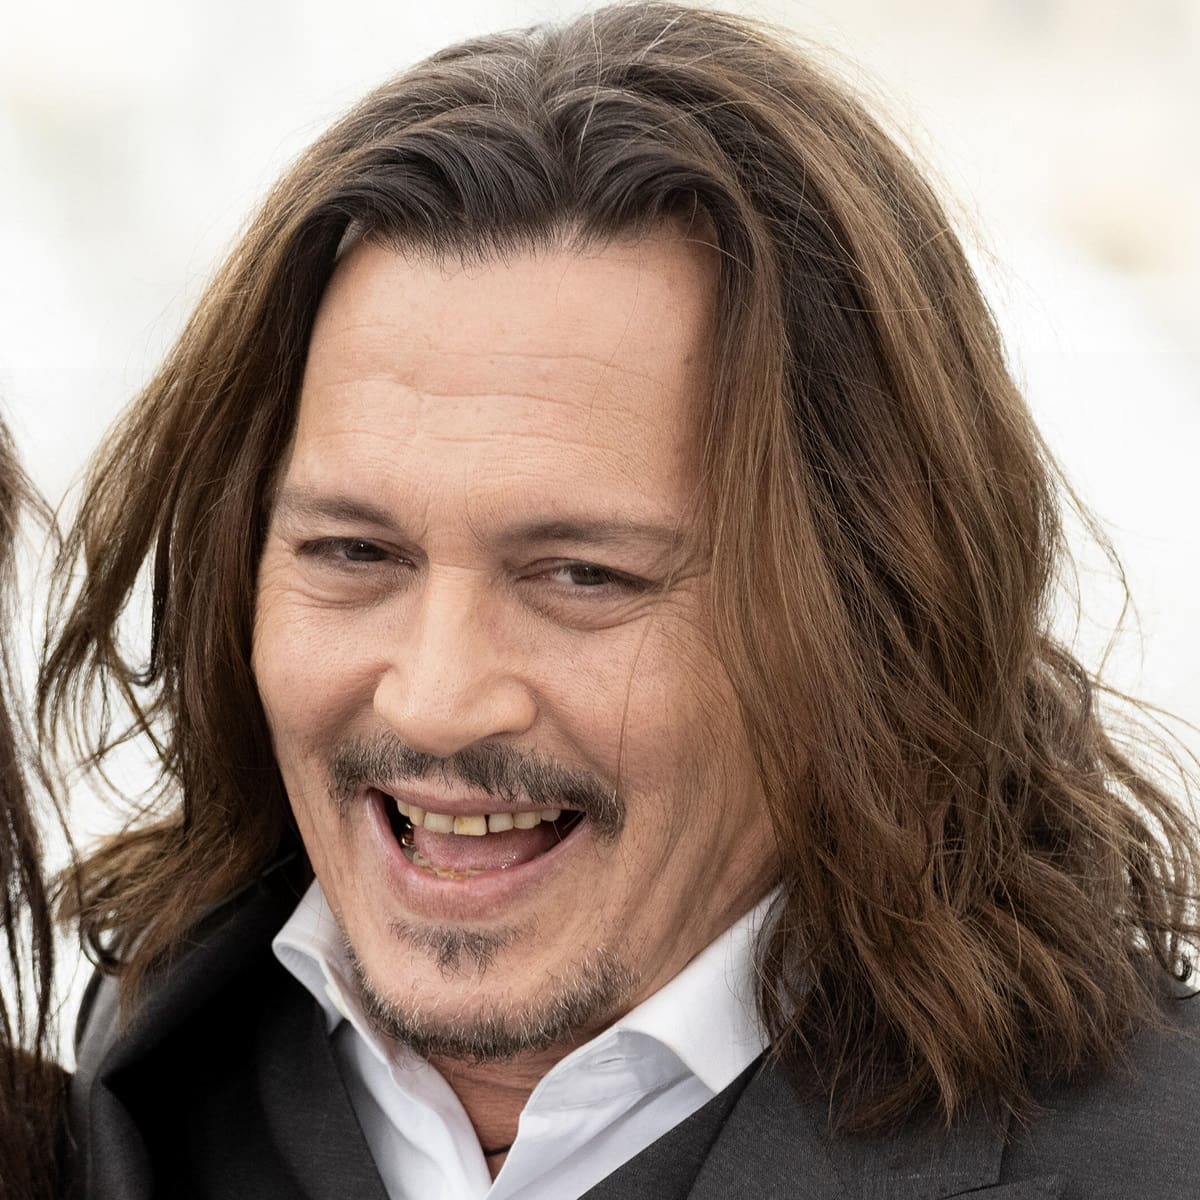 Johnny Depp's teeth have come under renewed scrutiny after he appeared at the 2023 Cannes Film Festival with noticeably stained and discolored teeth